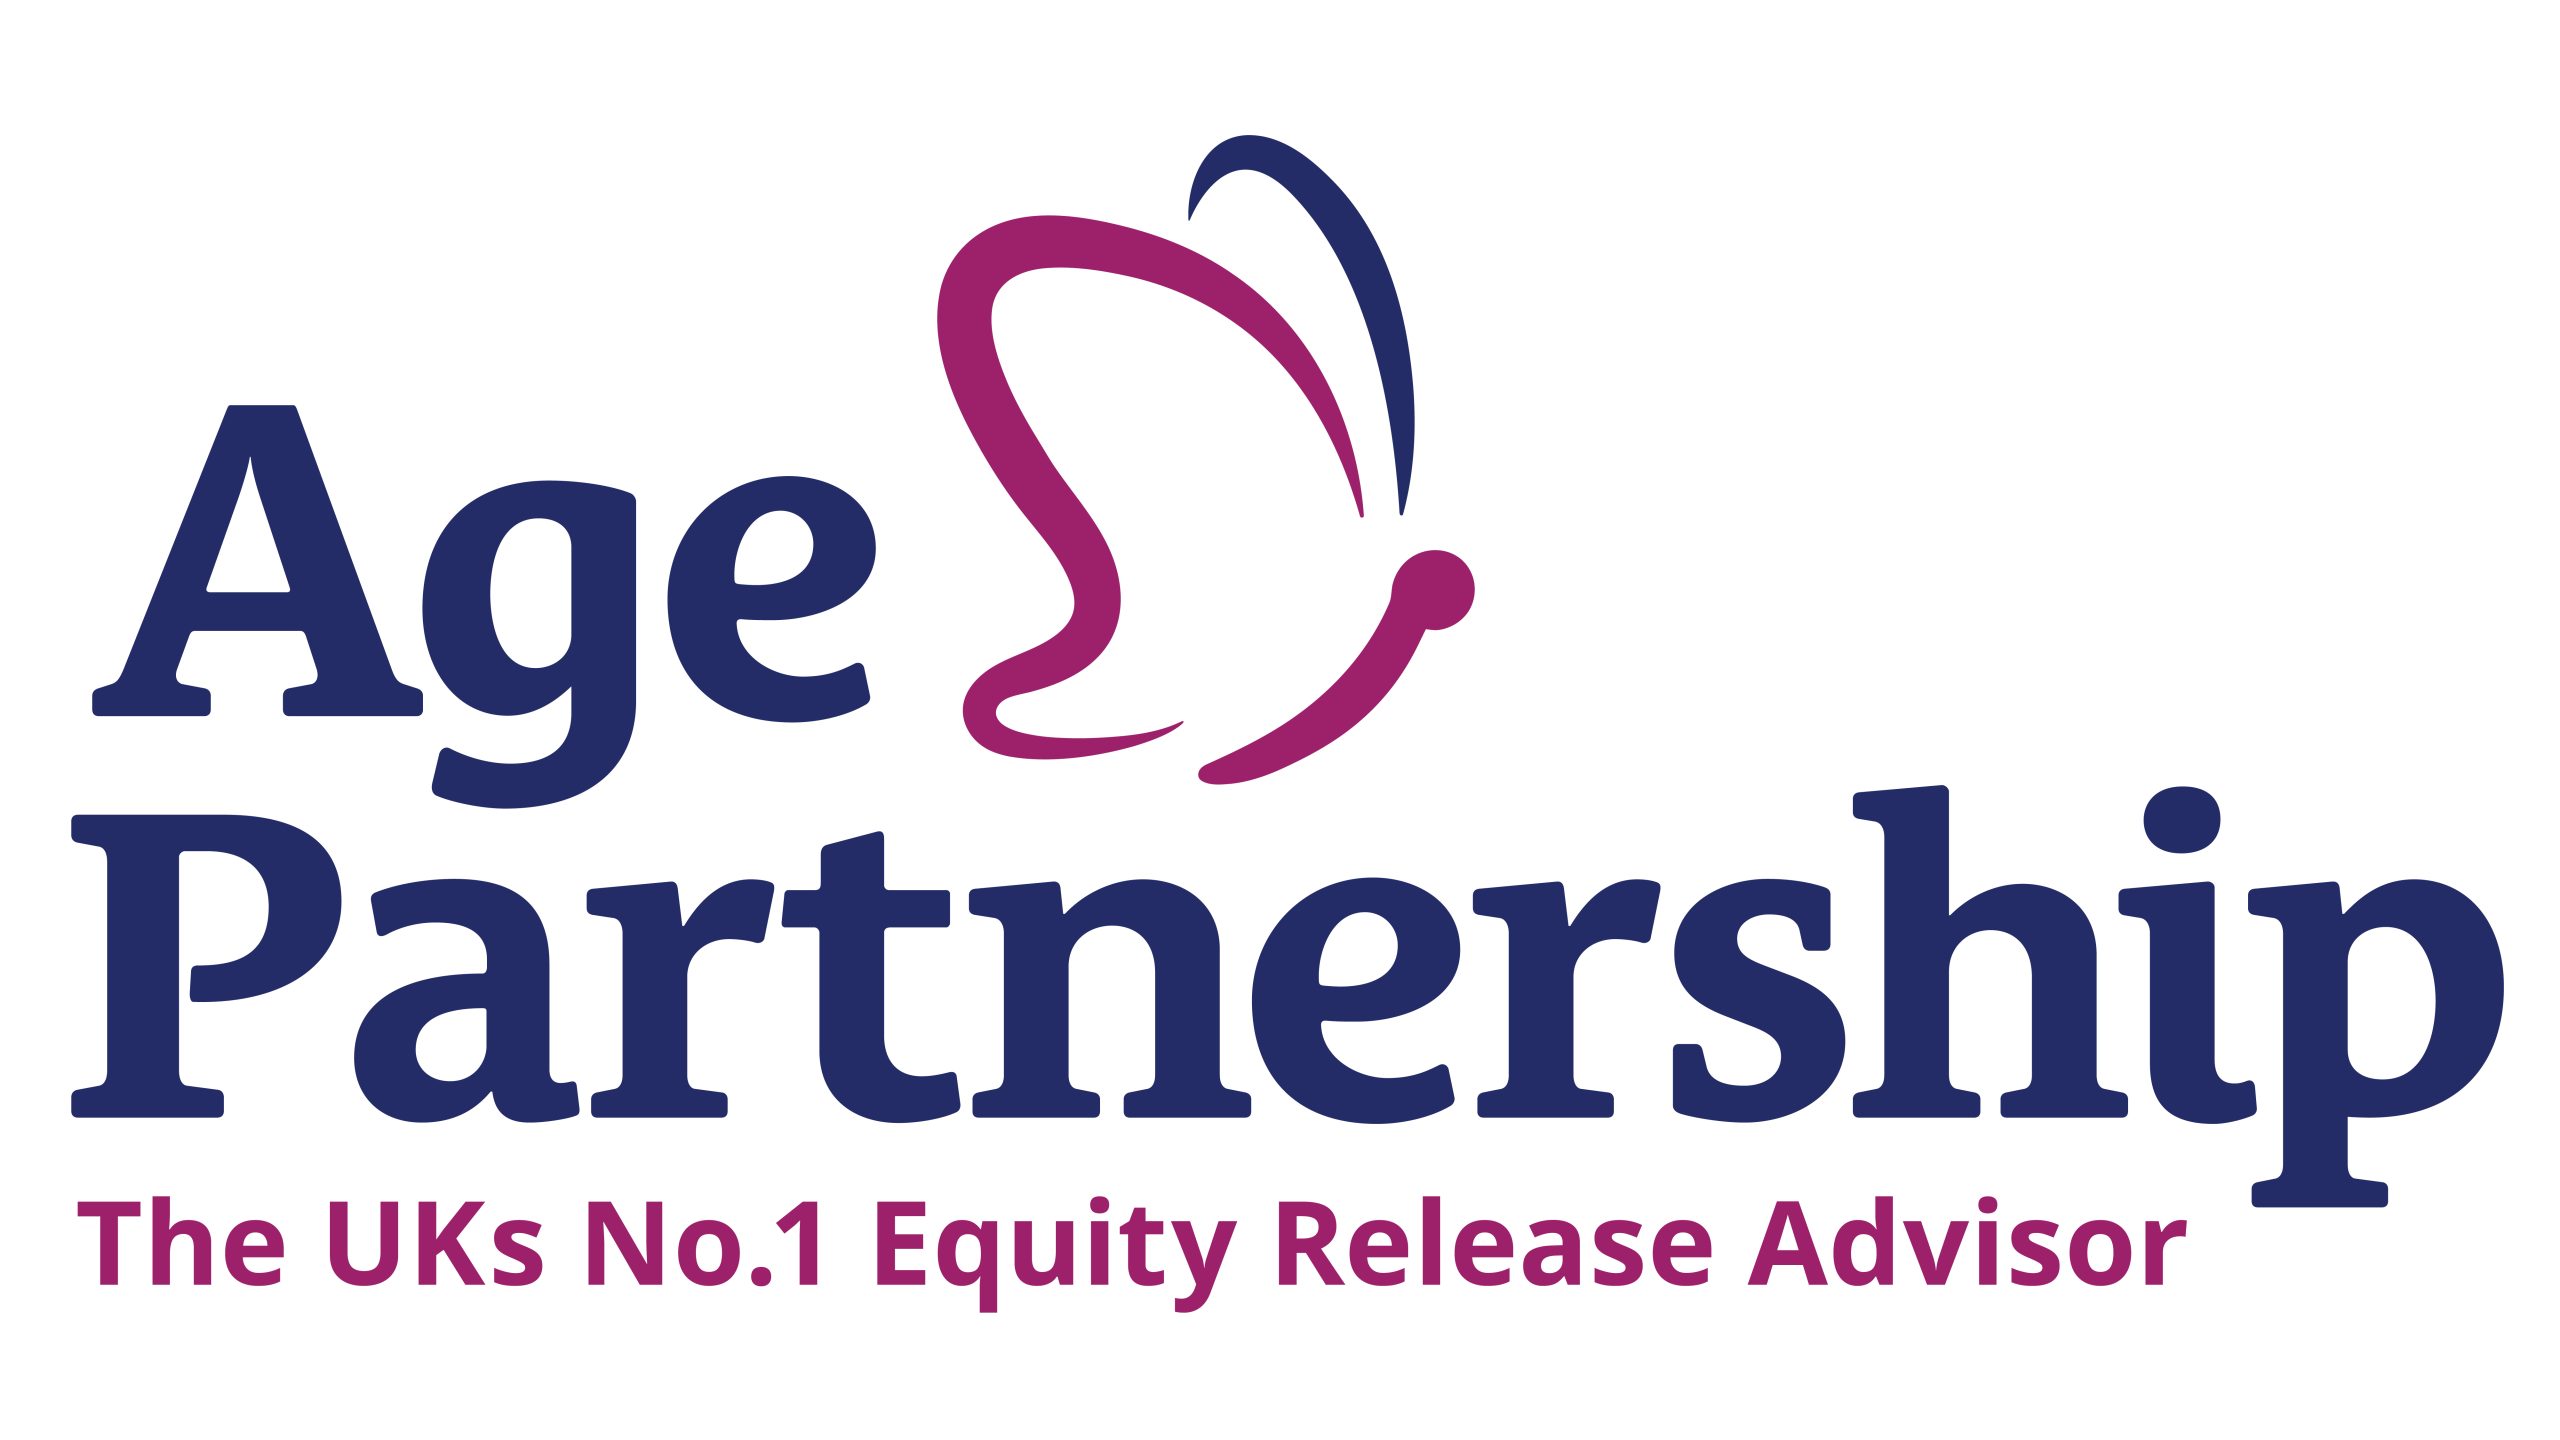 Age Partnership logo featuring their tagline that they are 'The UK's No. 1 equity release advisor'